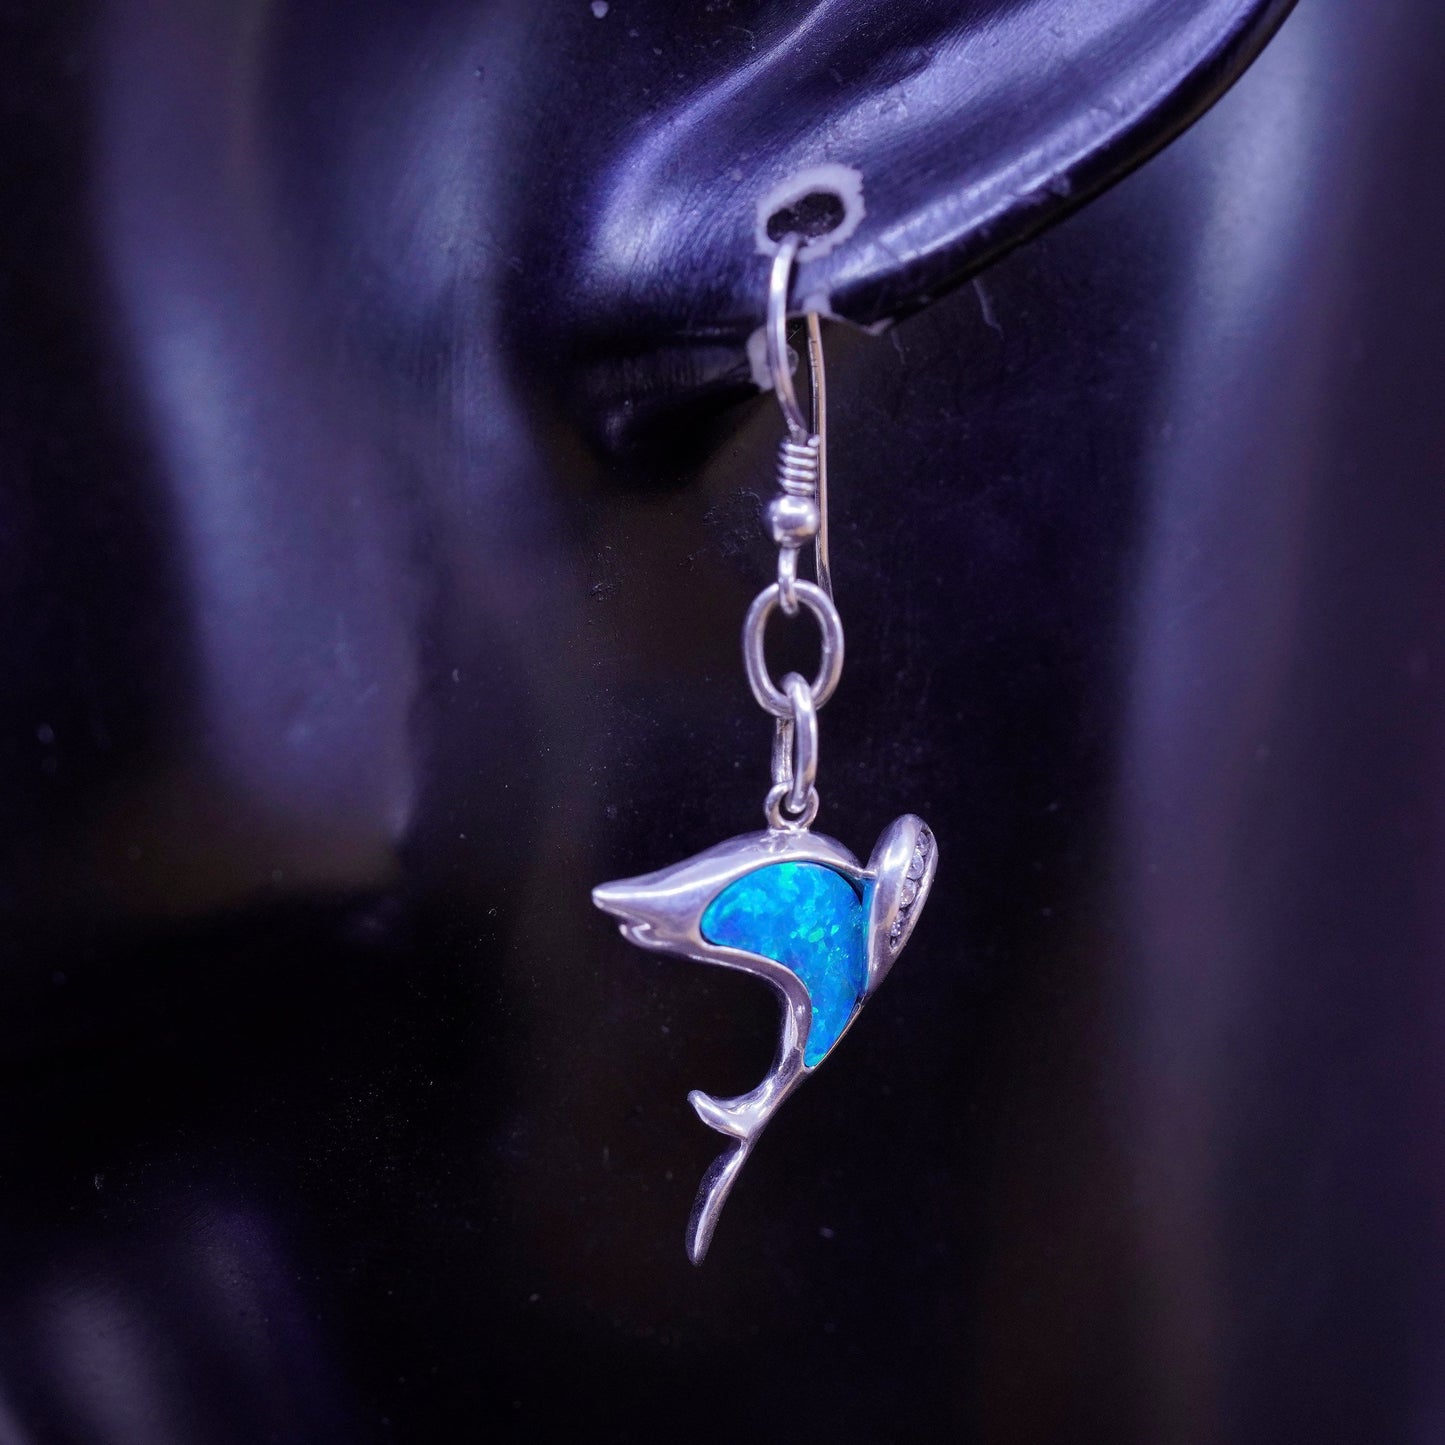 Vintage Sterling 925 silver handmade dolphin earrings with opal inlay